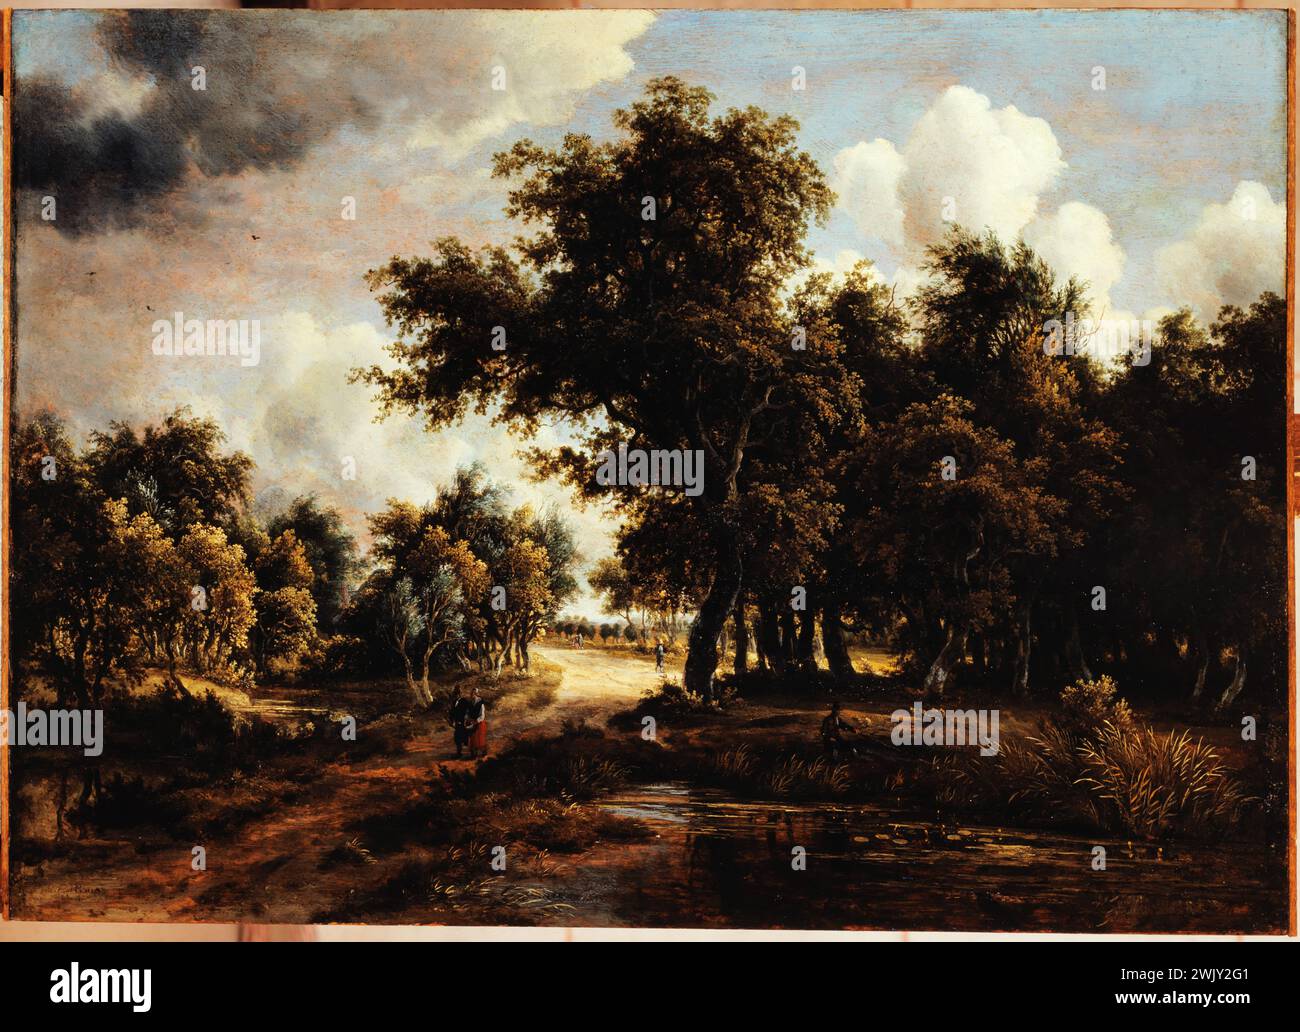 Meitert Hobbema (1638-1709). 'The path in the forest'. Oil on wood. 1658. Museum of Fine Arts of the City of Paris, Petit Palais. 74388-25 Pond, water extent, forest, wood on wood, walking, walker, cloud, landscape, person, wood, path, couple, walk Stock Photo